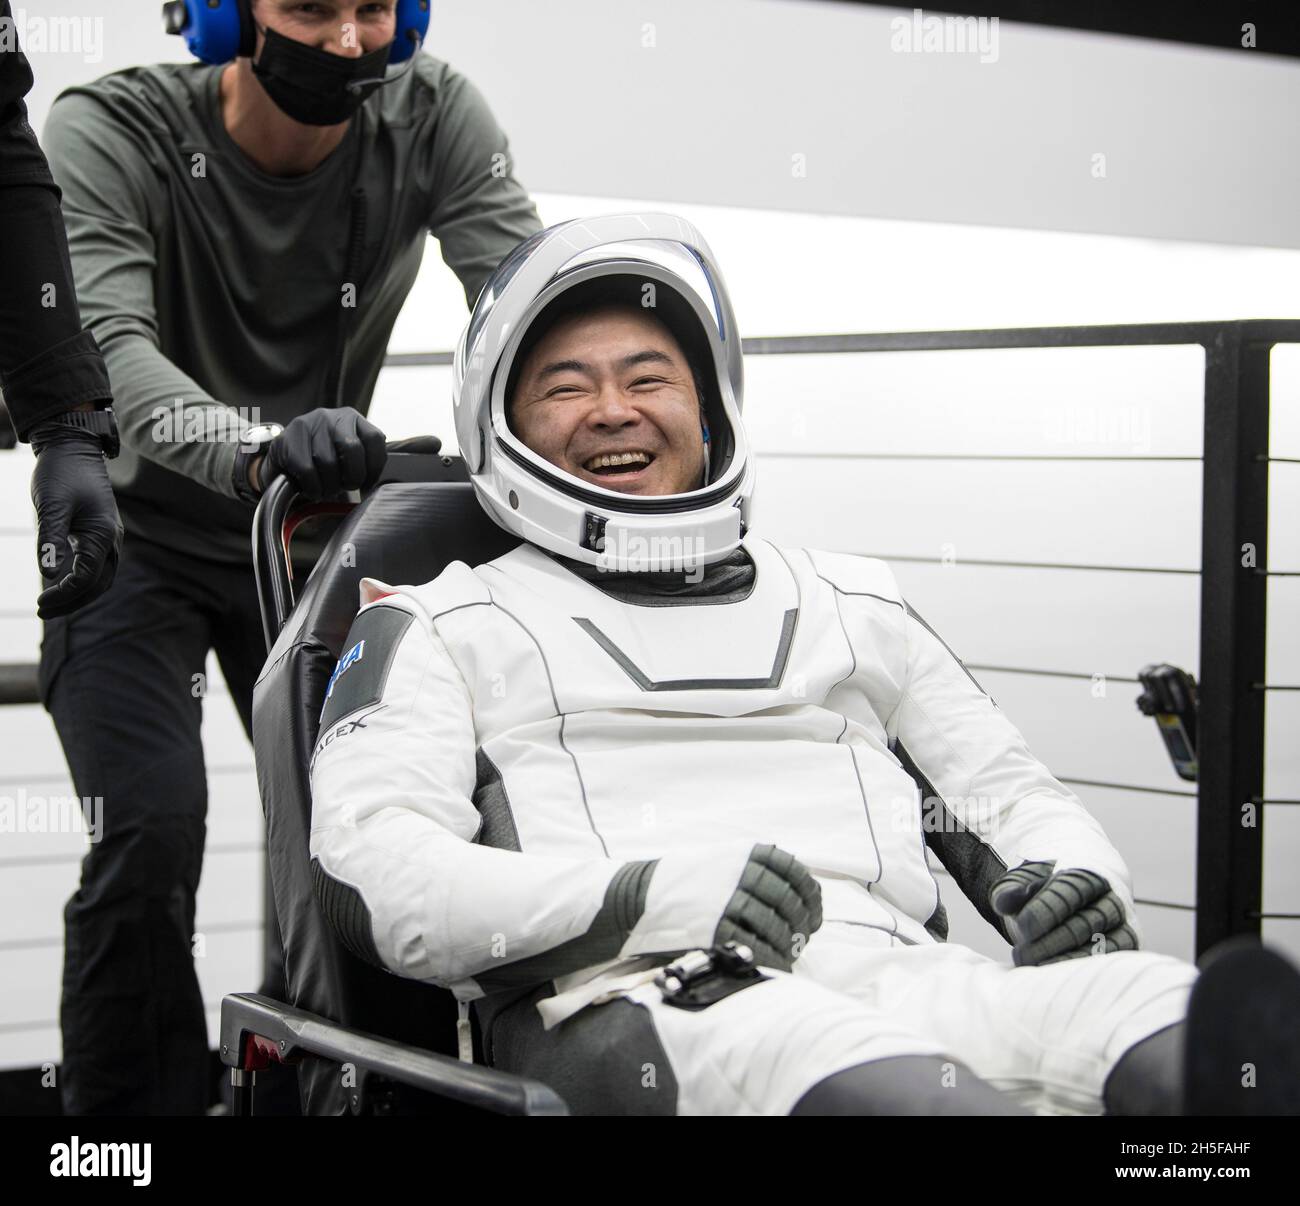 Pensecola, United States Of America. 08th Nov, 2021. Pensecola, United States of America. 08 November, 2021. Japan Aerospace Exploration Agency astronaut Aki Hoshide, is helped out of the SpaceX Crew Dragon Endeavour spacecraft after splashdown in the Gulf of Mexico November 8, 2021 off the coast of Pensecola, Florida. The capsule carried SpaceX Crew-2 NASA astronauts Shane Kimbrough, Megan McArthur, JAXA astronaut Aki Hoshide, and ESA astronaut Thomas Pesquet back to earth from the International Space Station. Credit: Aubrey Gemignani/NASA/Alamy Live News Stock Photo